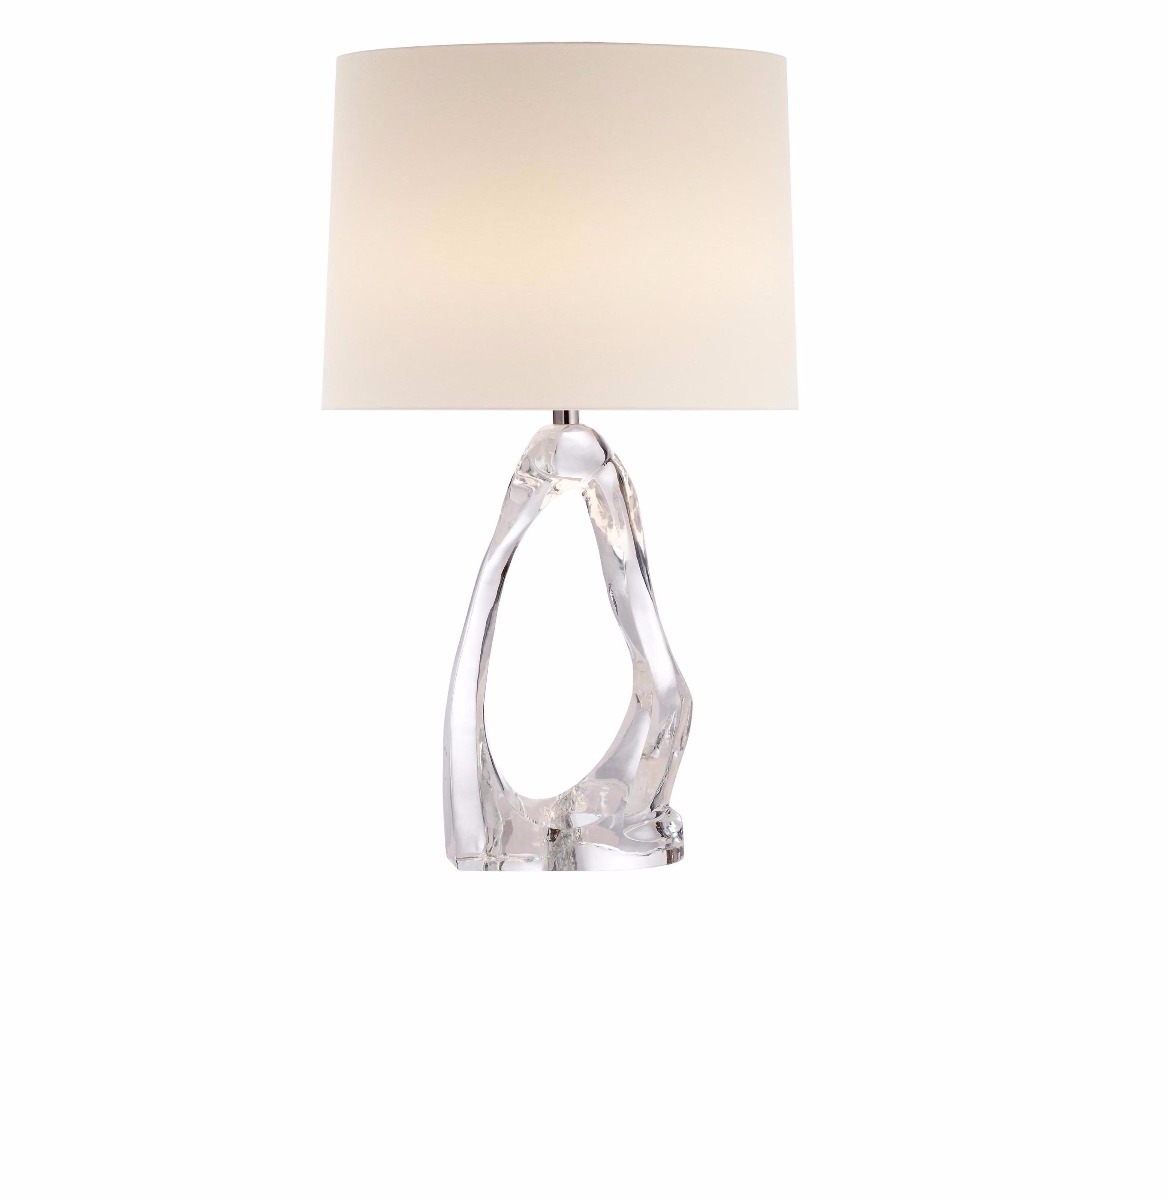 Unique luxury desk lamp with silver stand by luxuria london